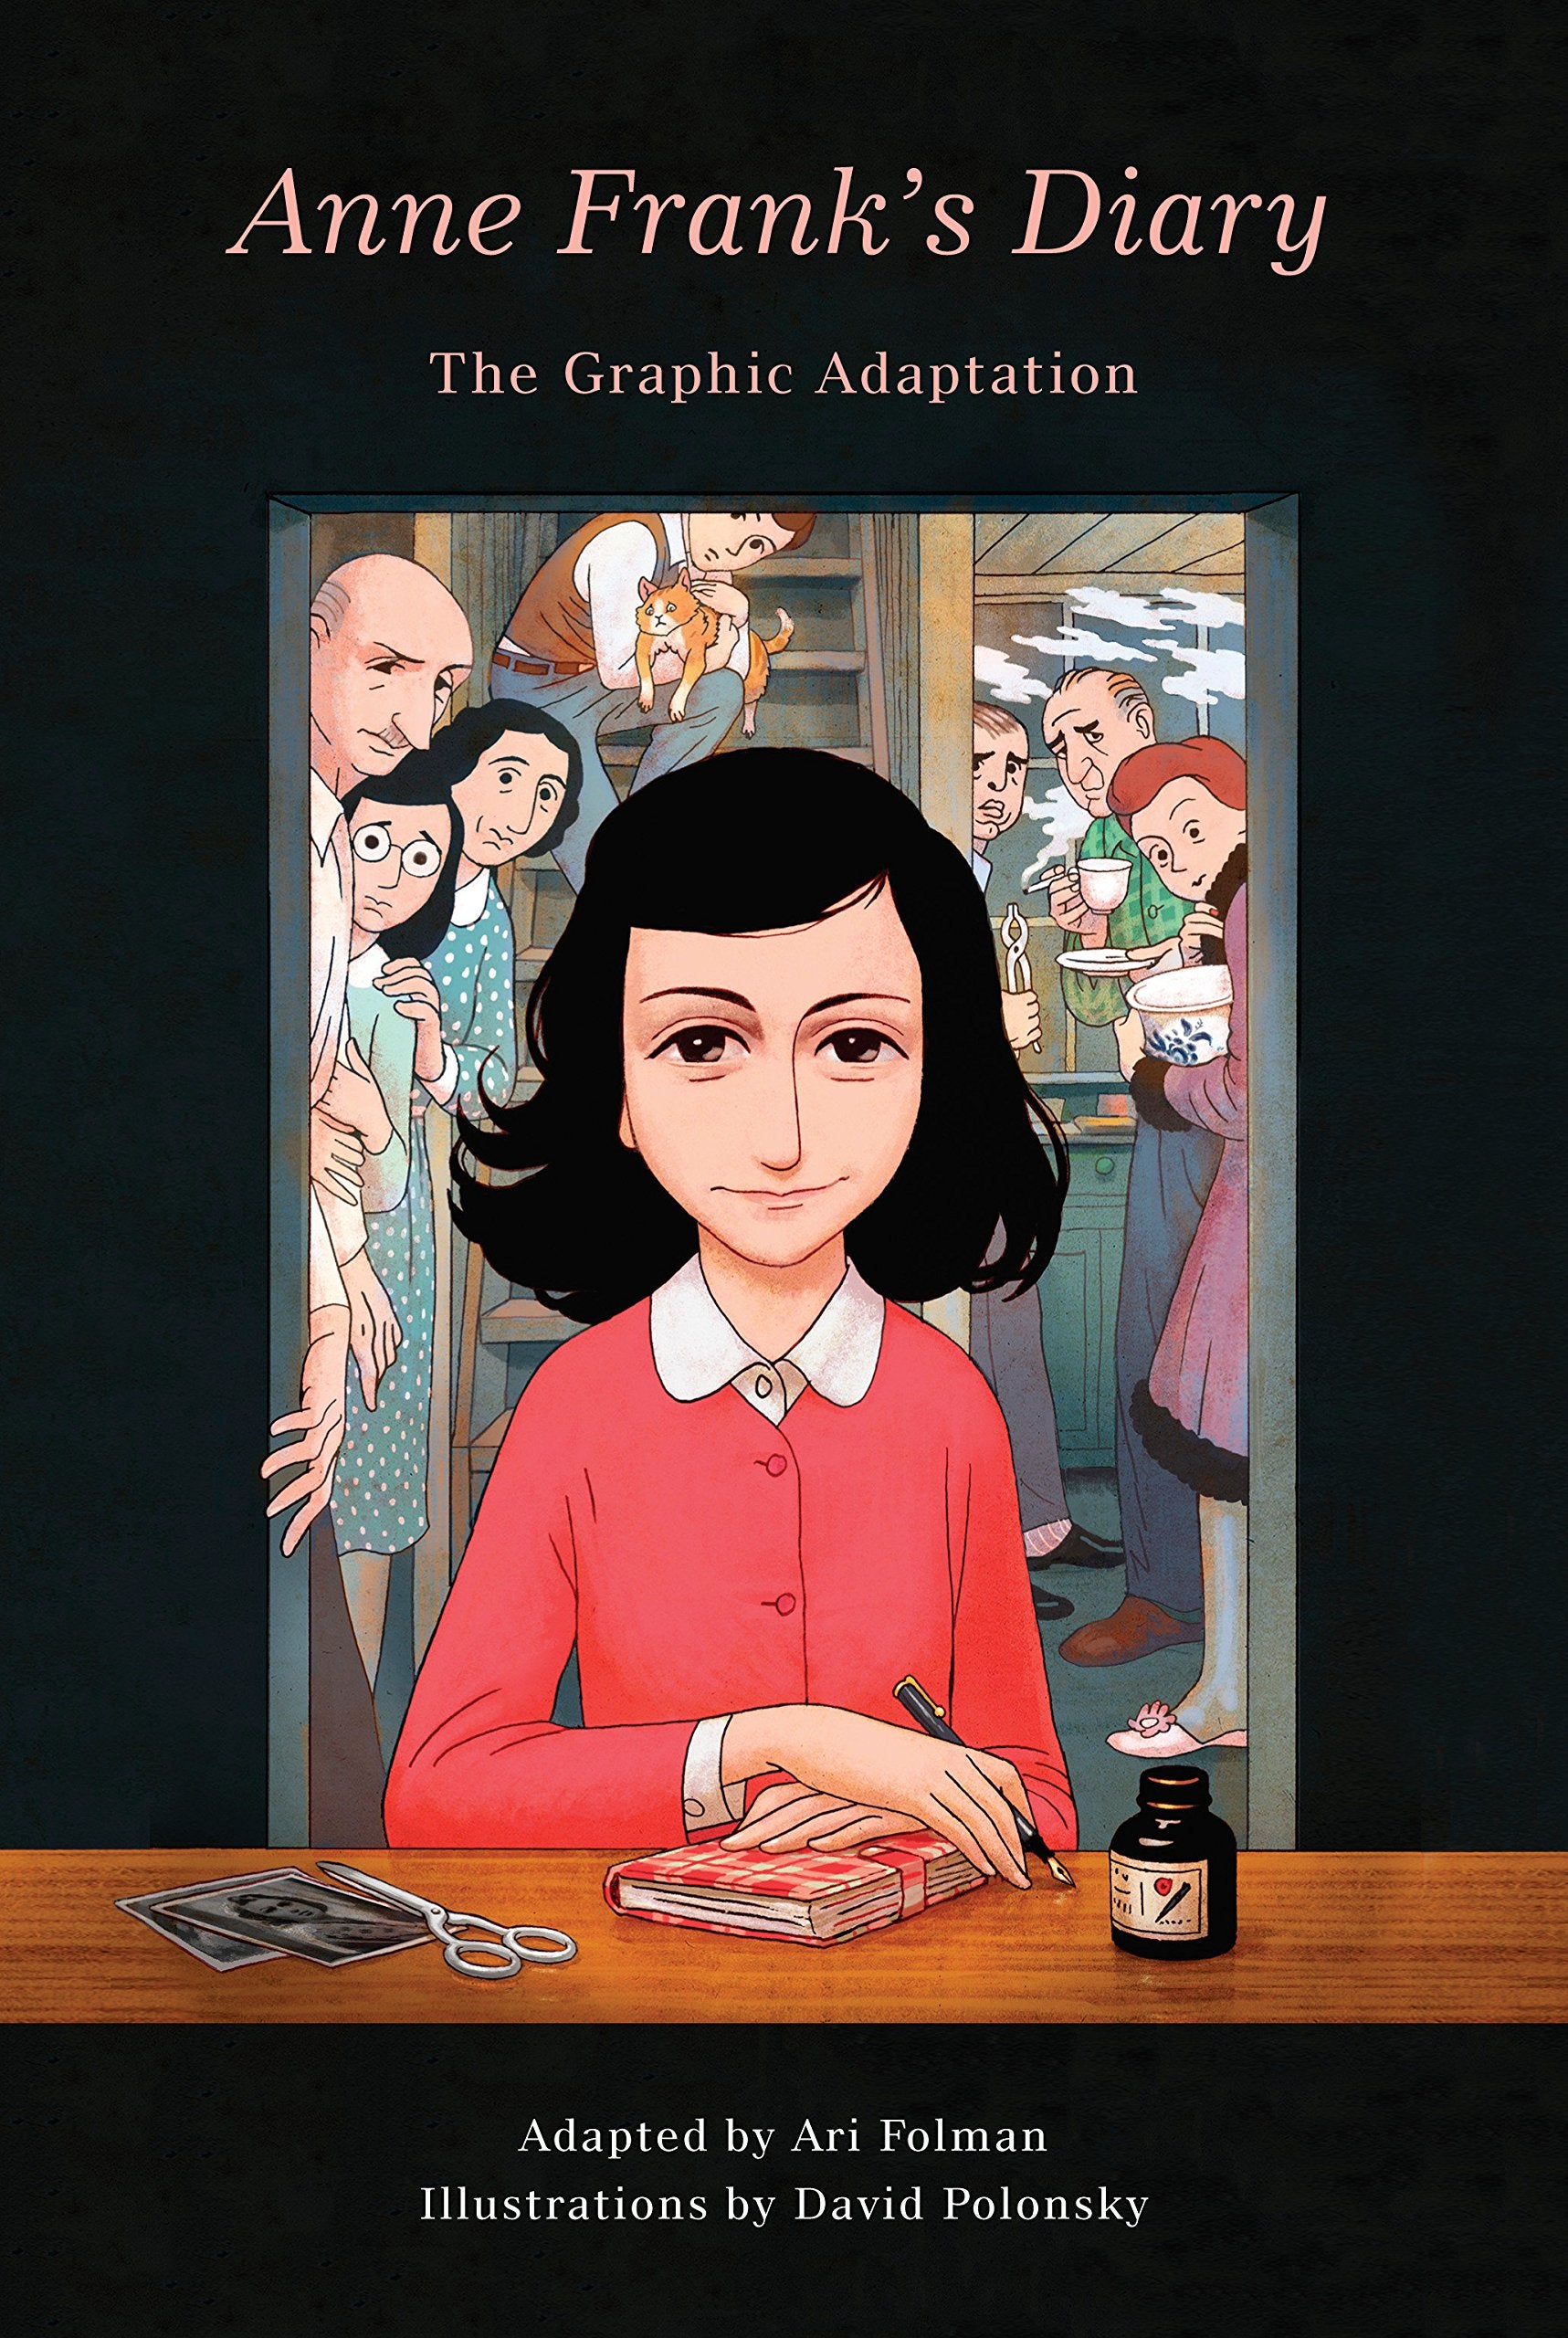 anne frank's diary: the graphic adaption book cover